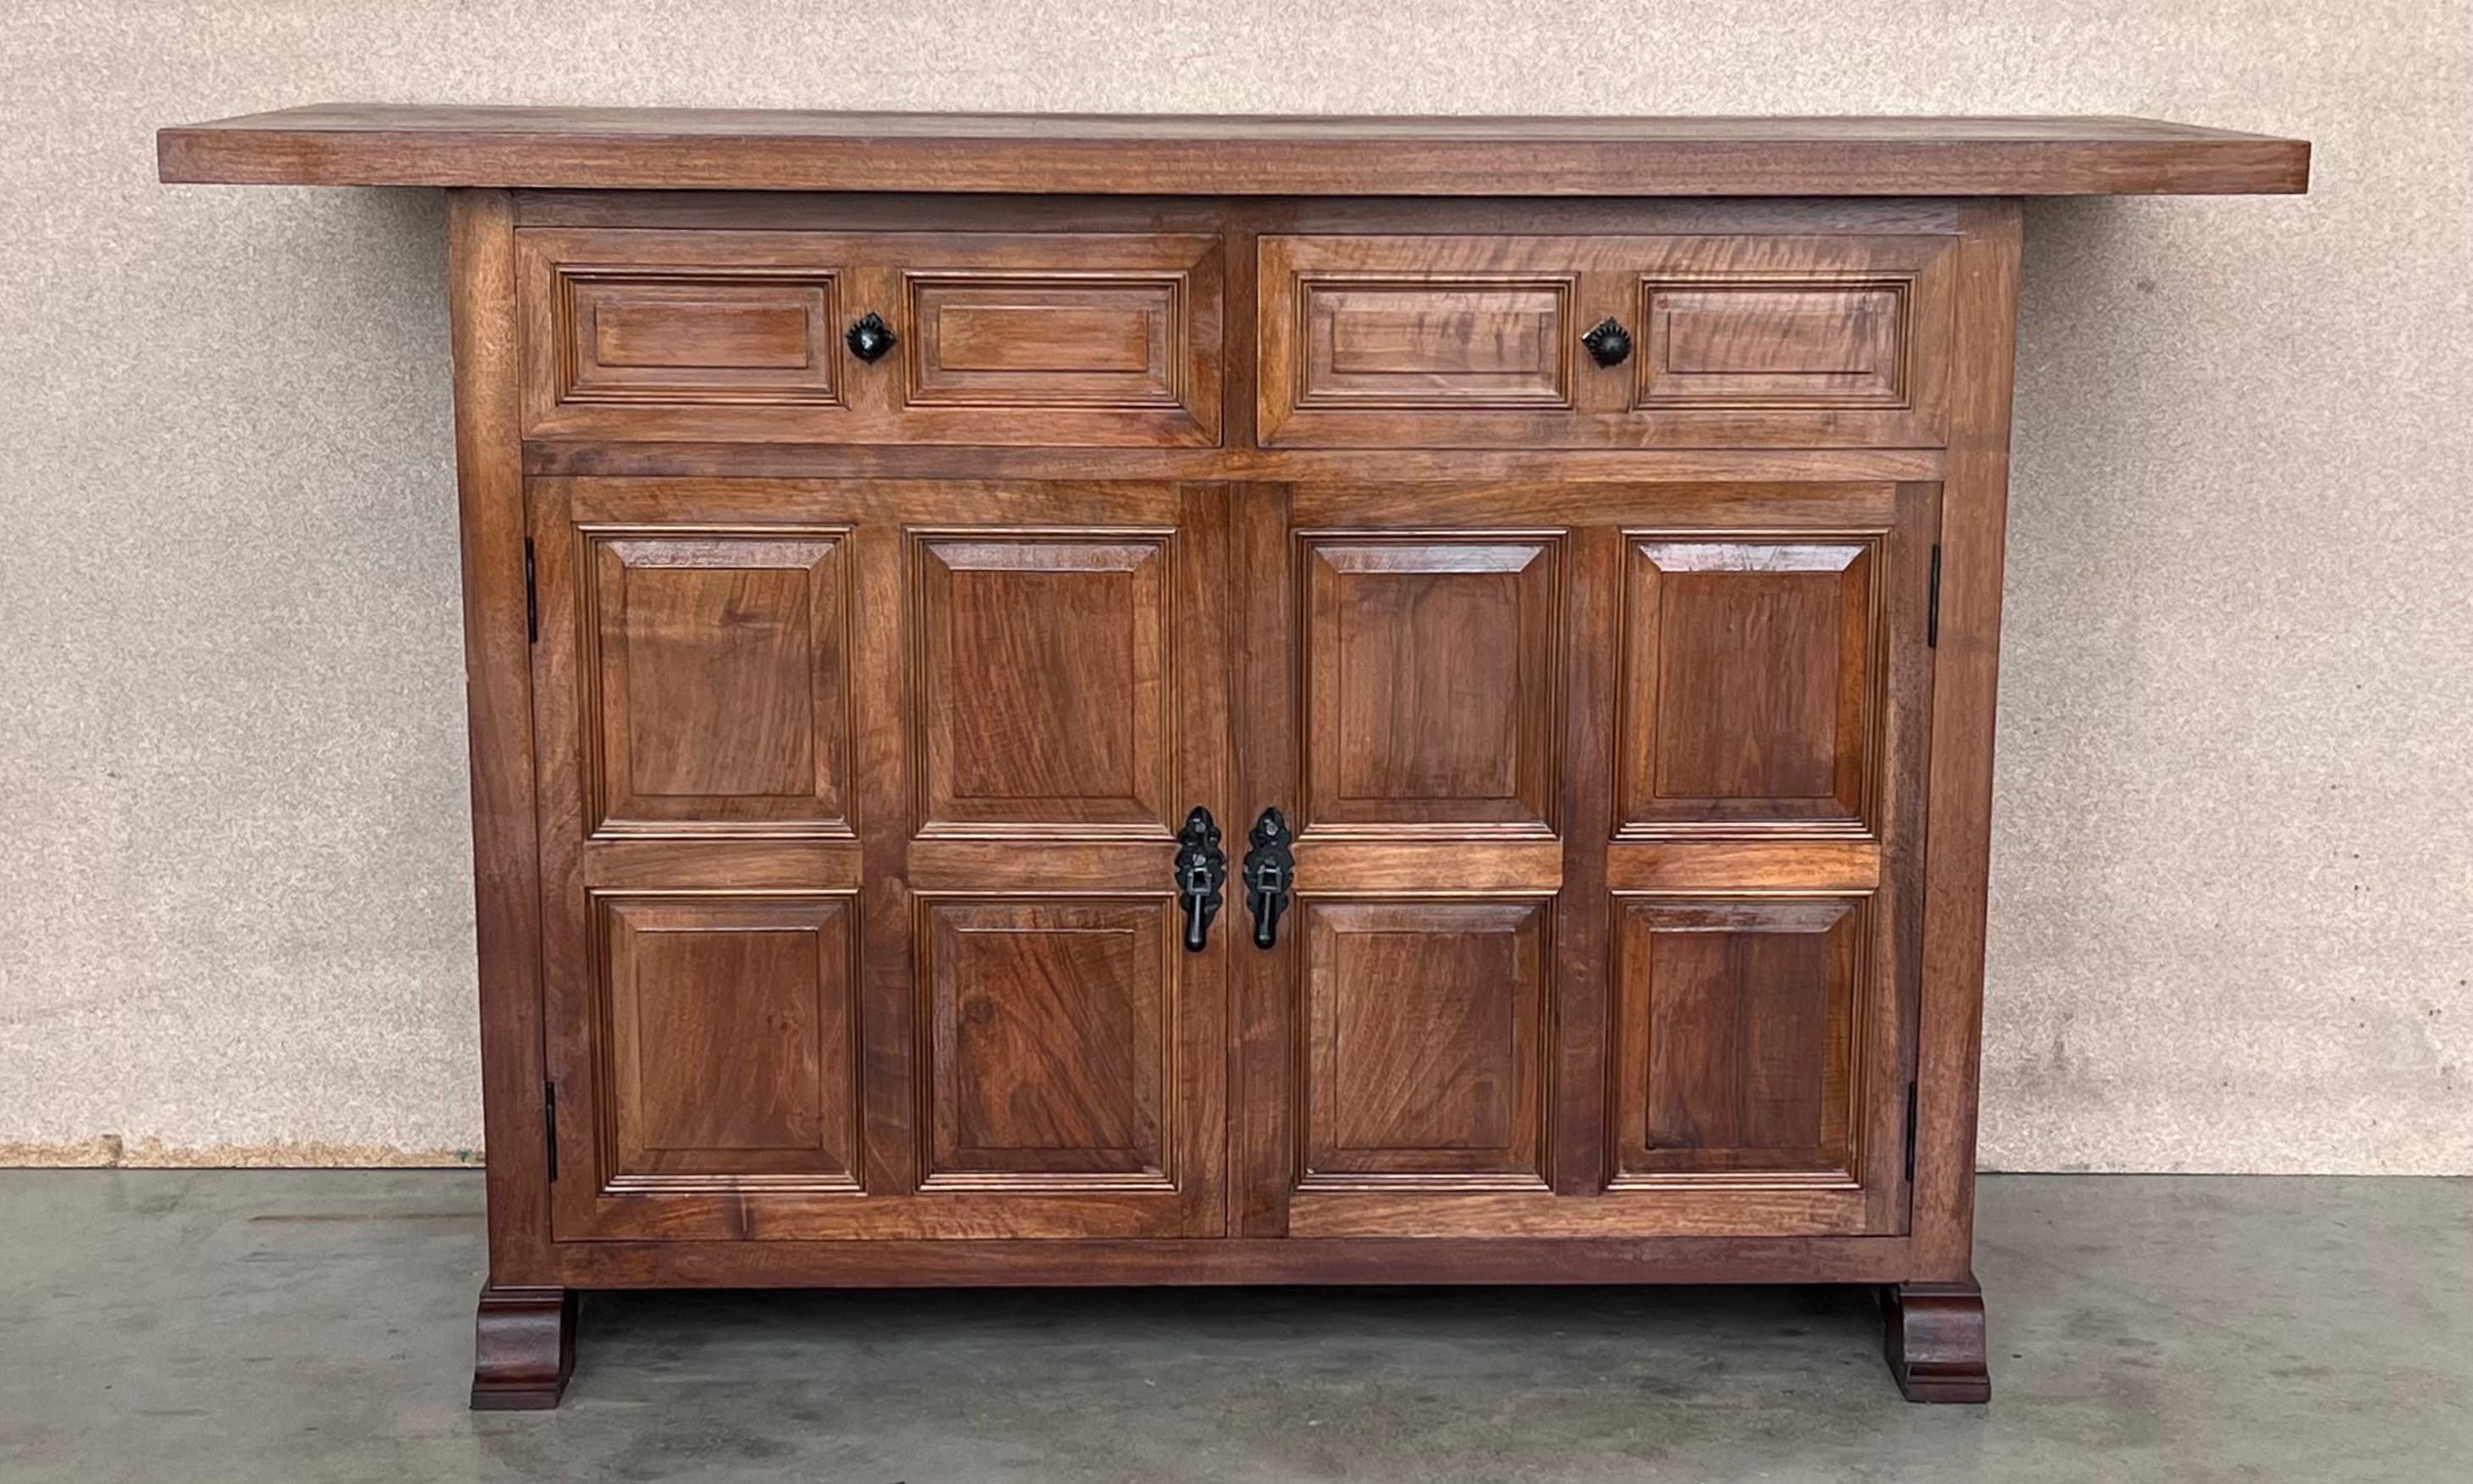 From Northern Spain, constructed of solid oak, the rectangular top with molded edge top a conforming case housing two drawers over two doors, the doors paneled with solid walnut, raised on a plinth base.
Very solid and heavy buffet or